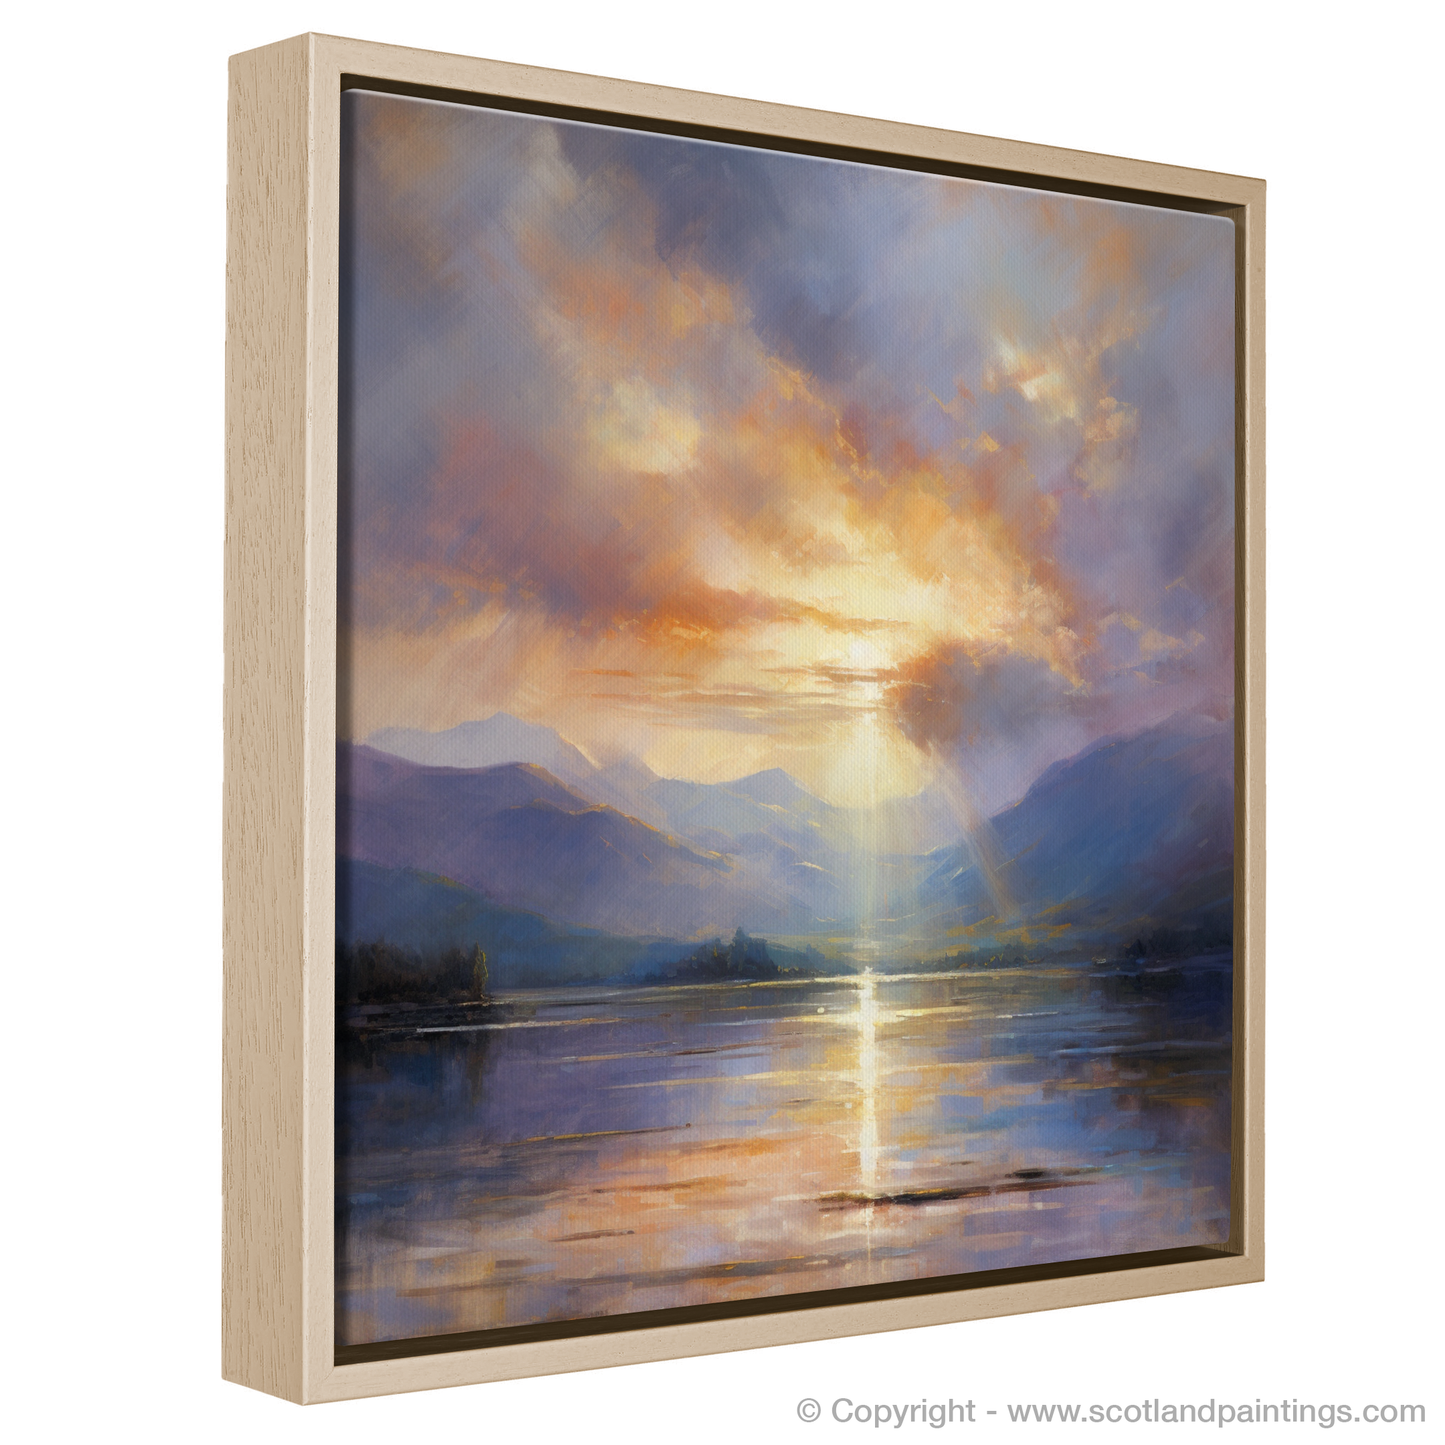 Painting and Art Print of Crepuscular rays above Loch Lomond entitled "Crepuscular Majesty over Loch Lomond".